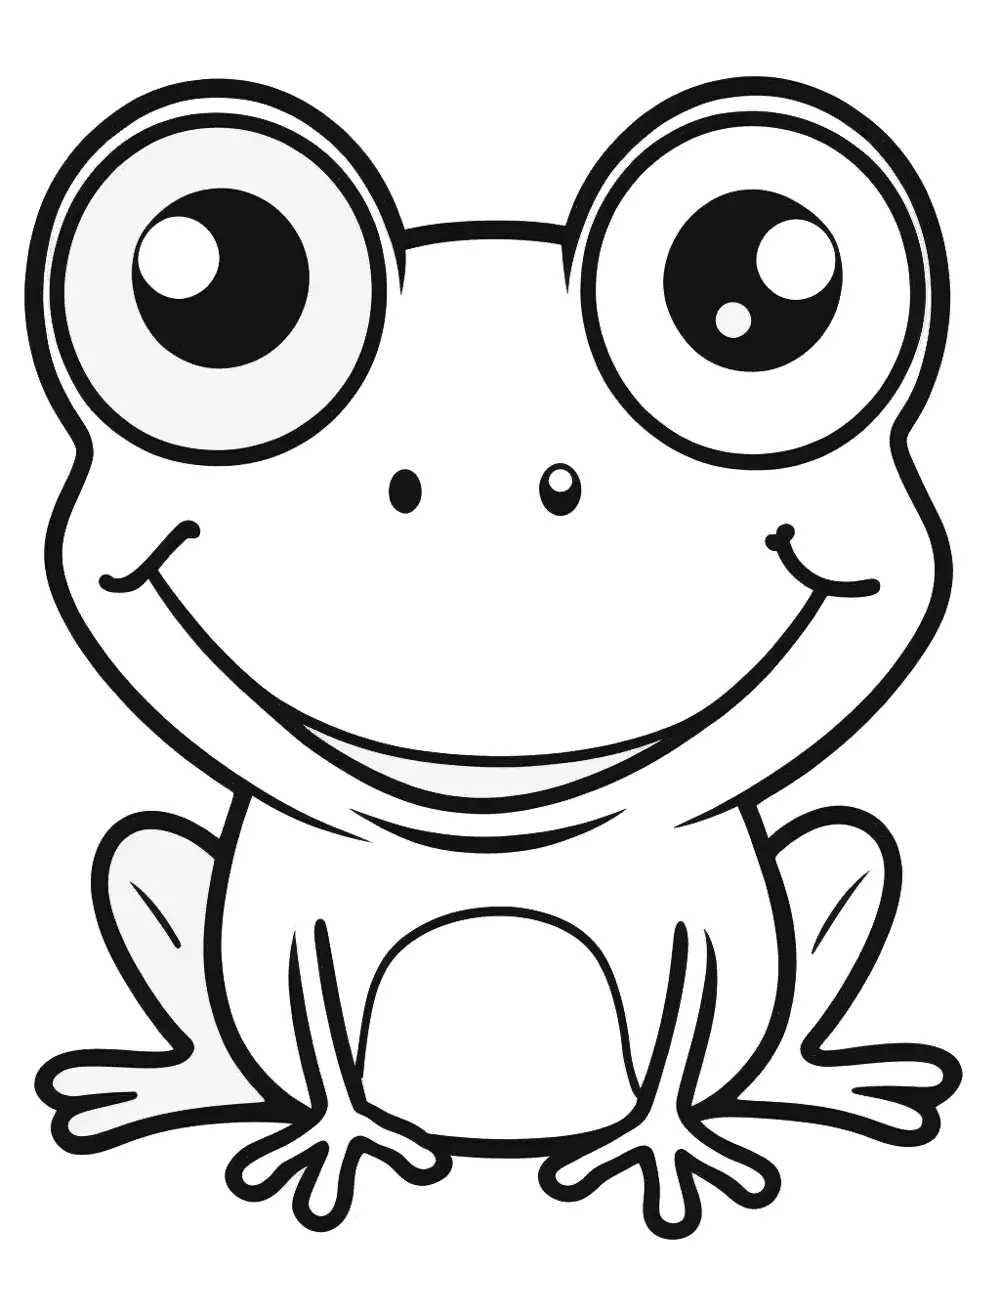 Cute Cartoon Frog Coloring Page - A cartoon-style cute frog with a big smile and big eyes.